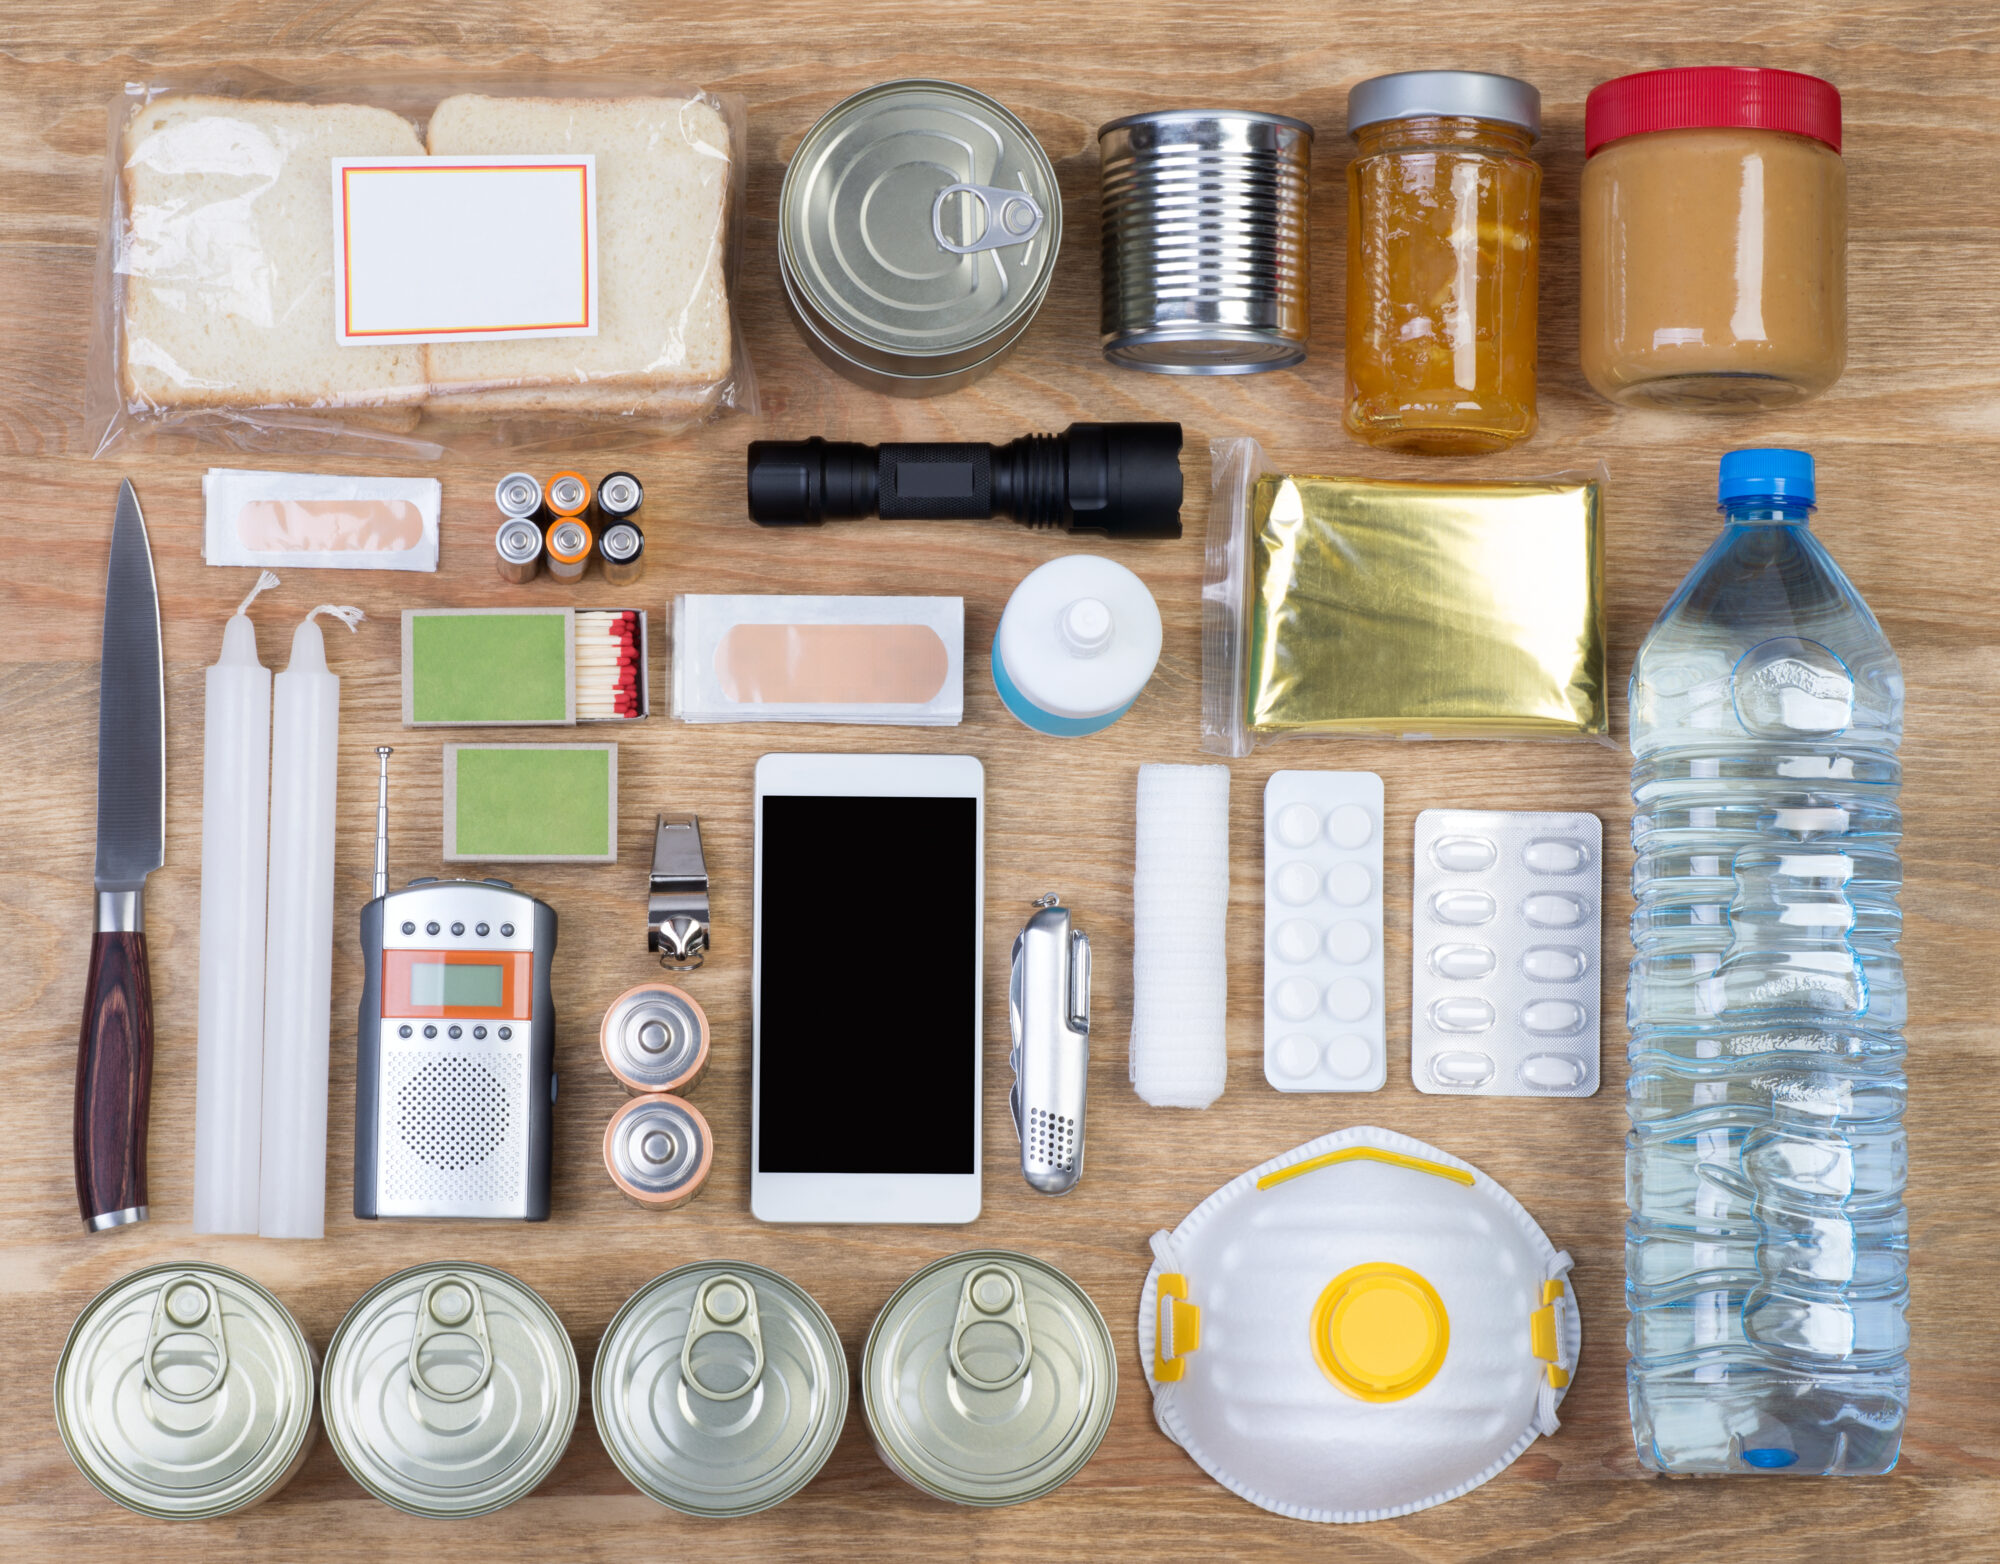 A well-organized survival kit displayed on a wooden surface. The kit includes essential items such as a can opener, canned food, jars of peanut butter and jam, a flashlight, batteries, candles, matches, green scrubbing pads, soap, a pocket knife, a radio, a whistle, a smartphone, adhesive bandages, tablets in blister packs, a roll of gauze, a dust mask, and a large bottle of water.